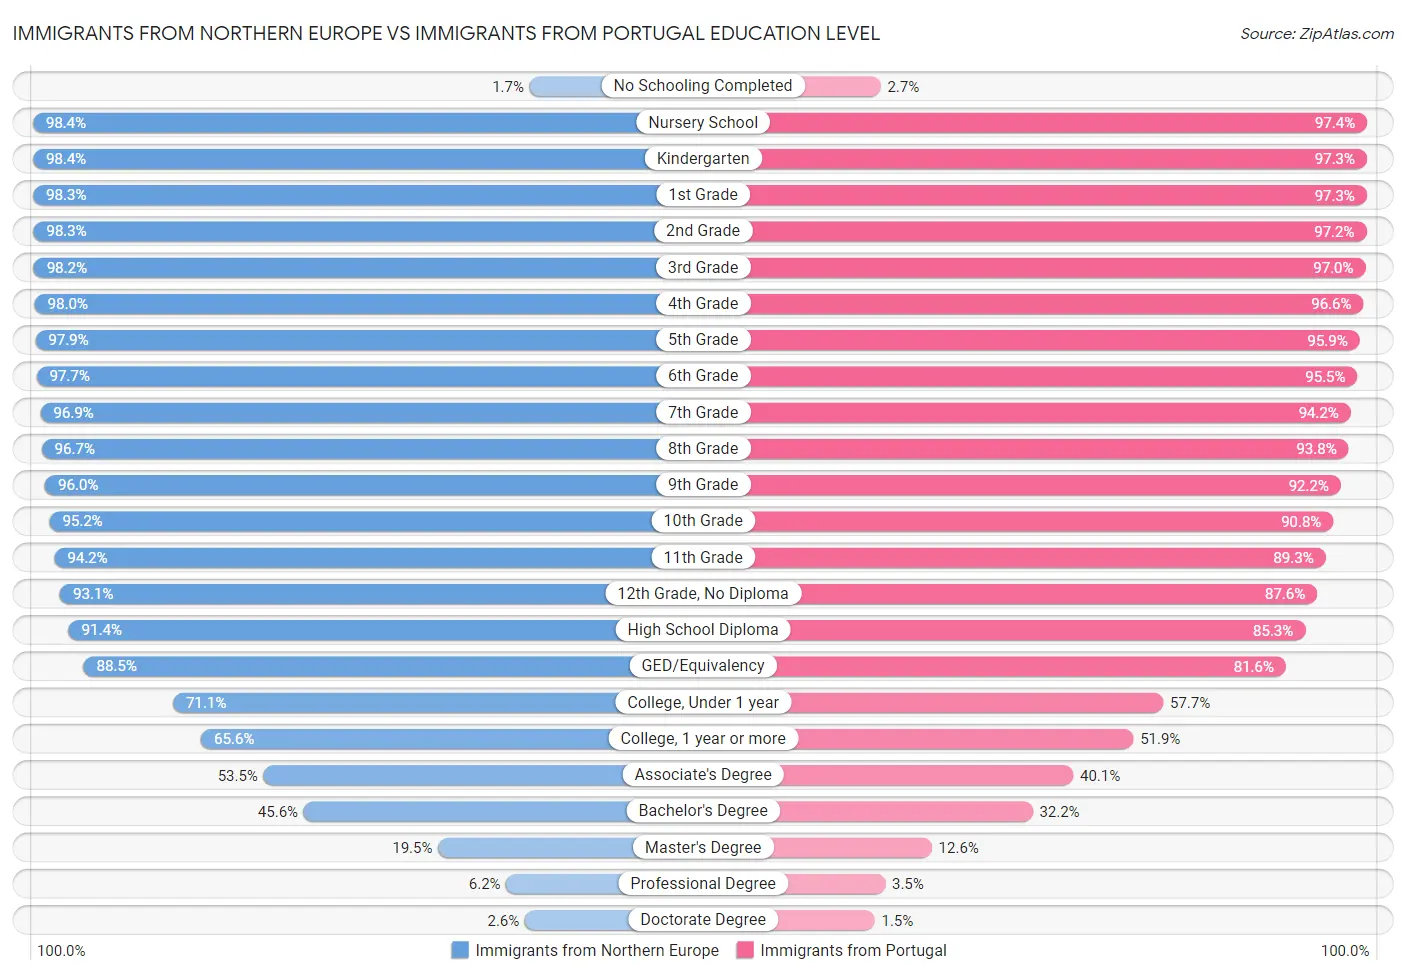 Immigrants from Northern Europe vs Immigrants from Portugal Education Level